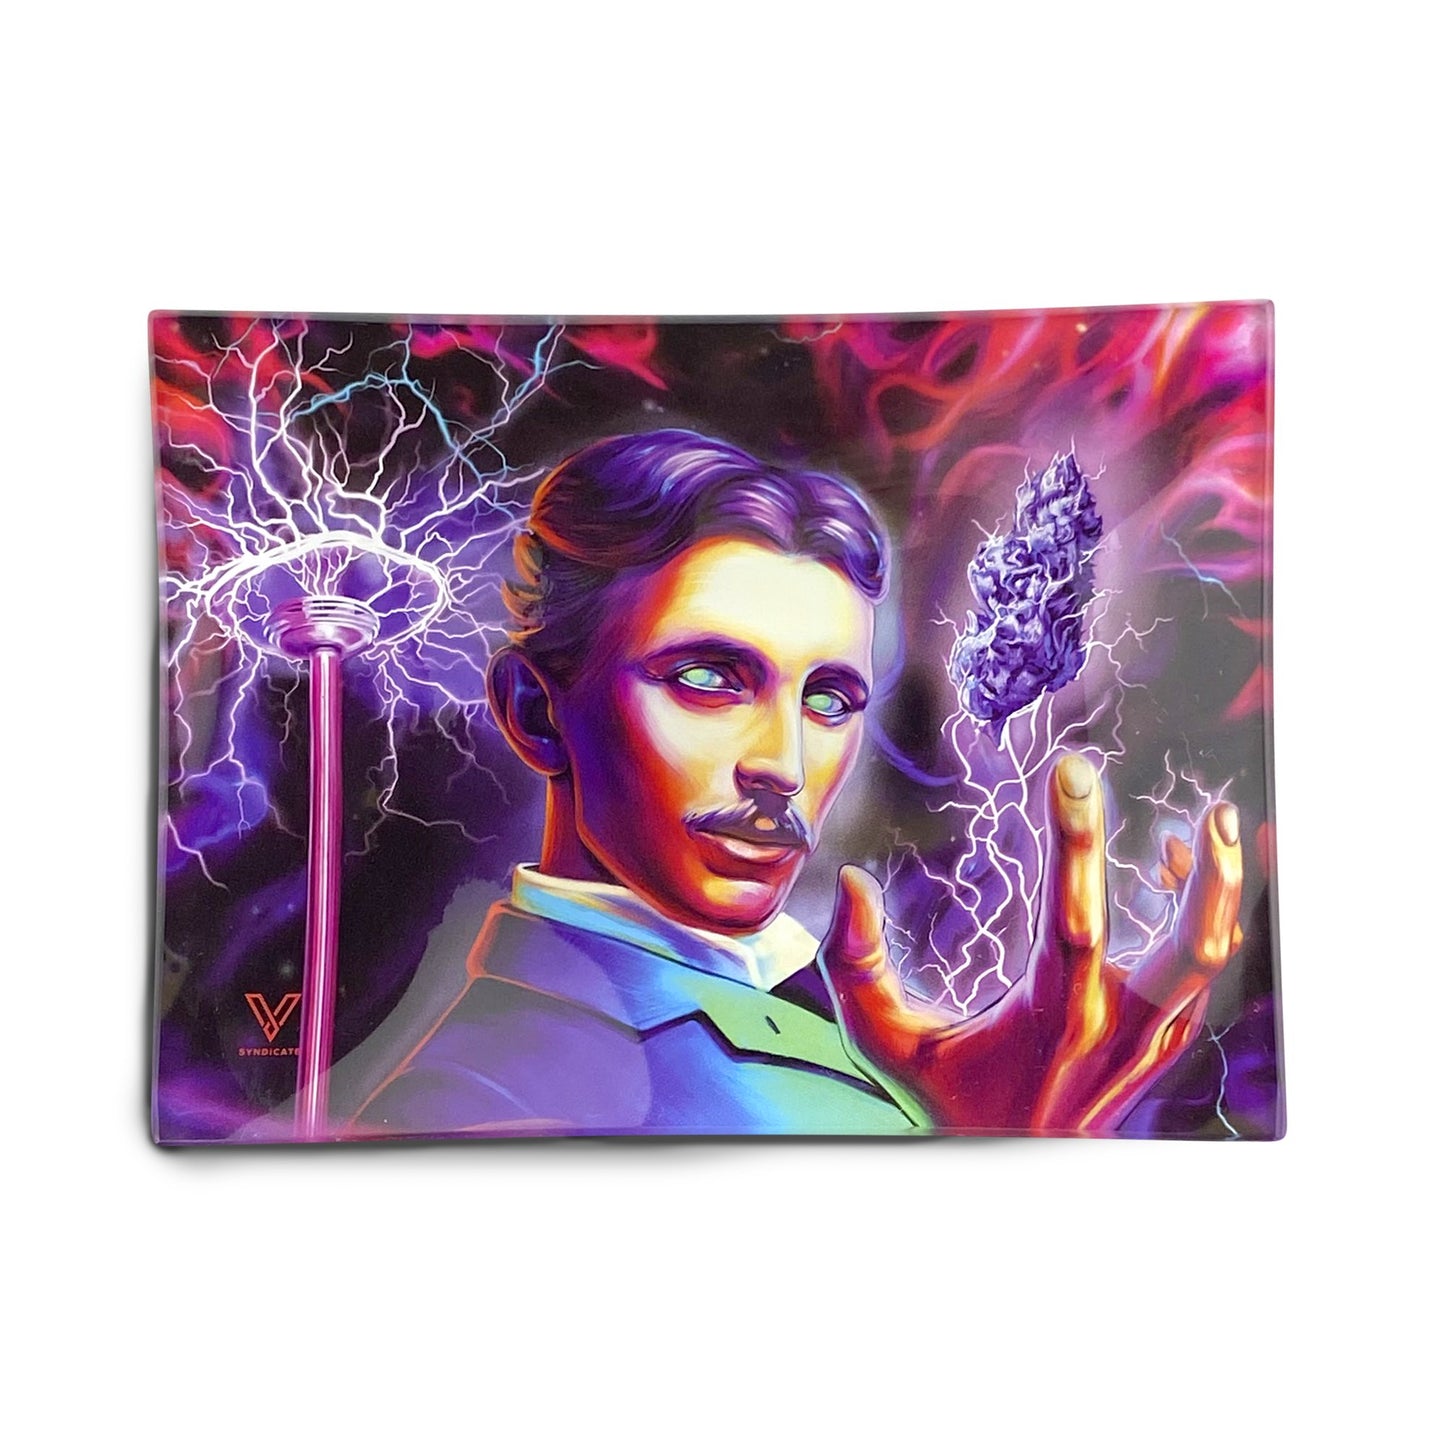 HIGH VOLTAGE TESLA GLASS ROLLING TRAY BY V SYNDICATE - SMALL OR MEDIUM